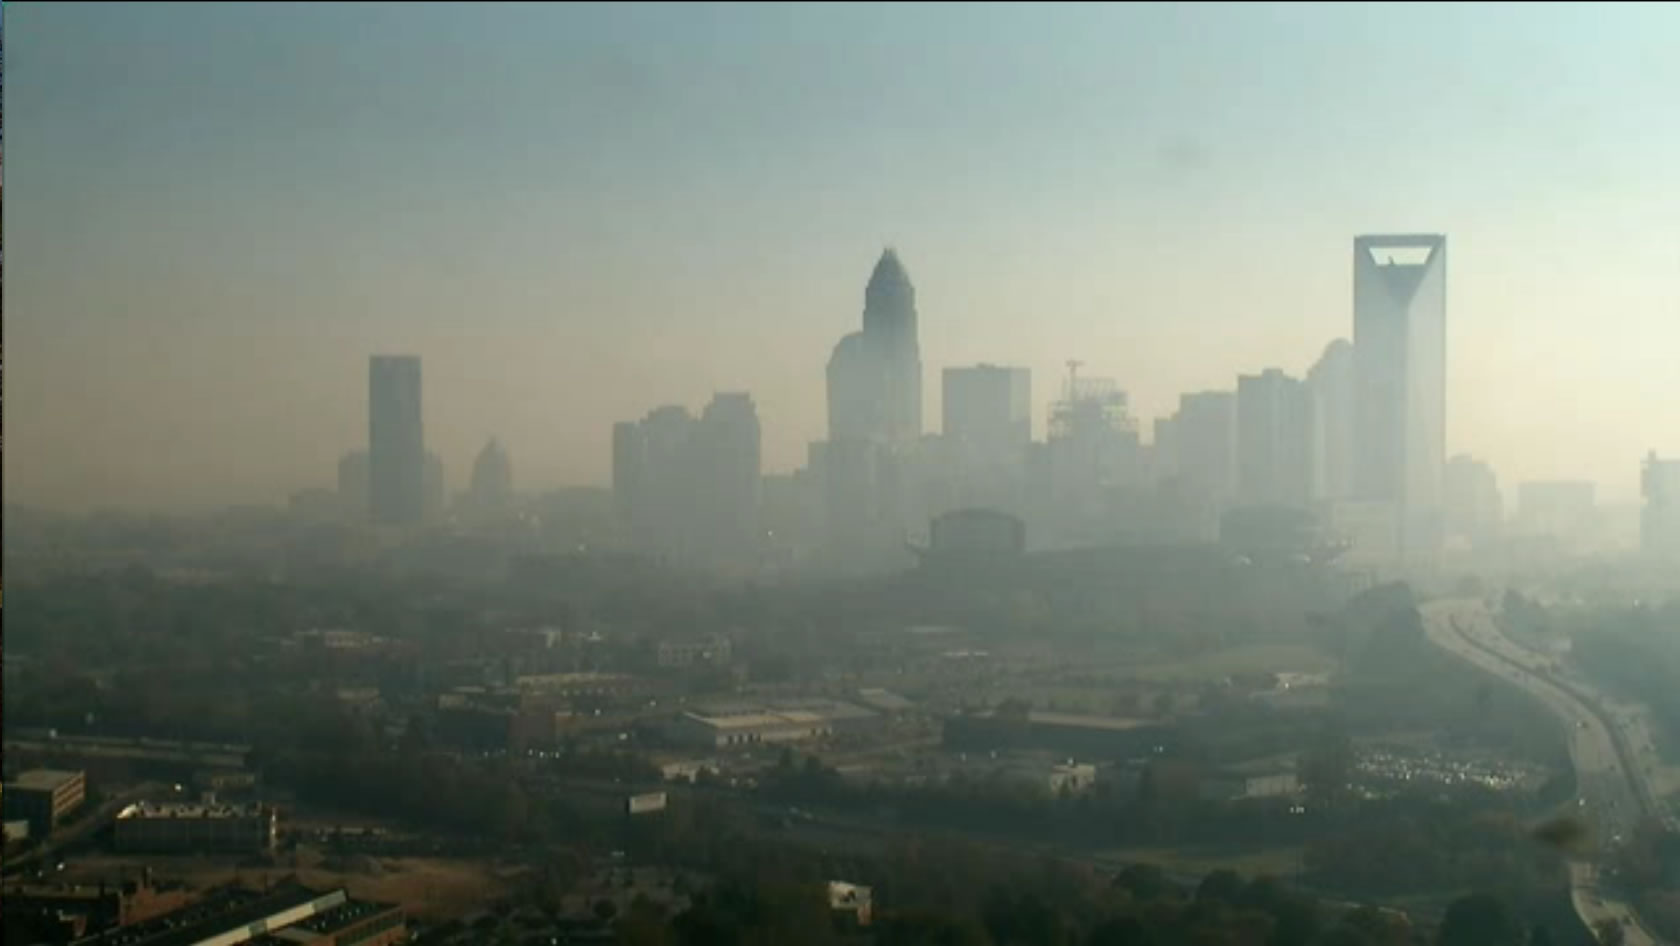 Image of Charlotte, North Carolina in November 2016 after smoke was transported from fires on the eastern NC Appalachian mountains.  Air Quality Index was red for a day, which is really rare.  Photo is from WBTV tower cam.